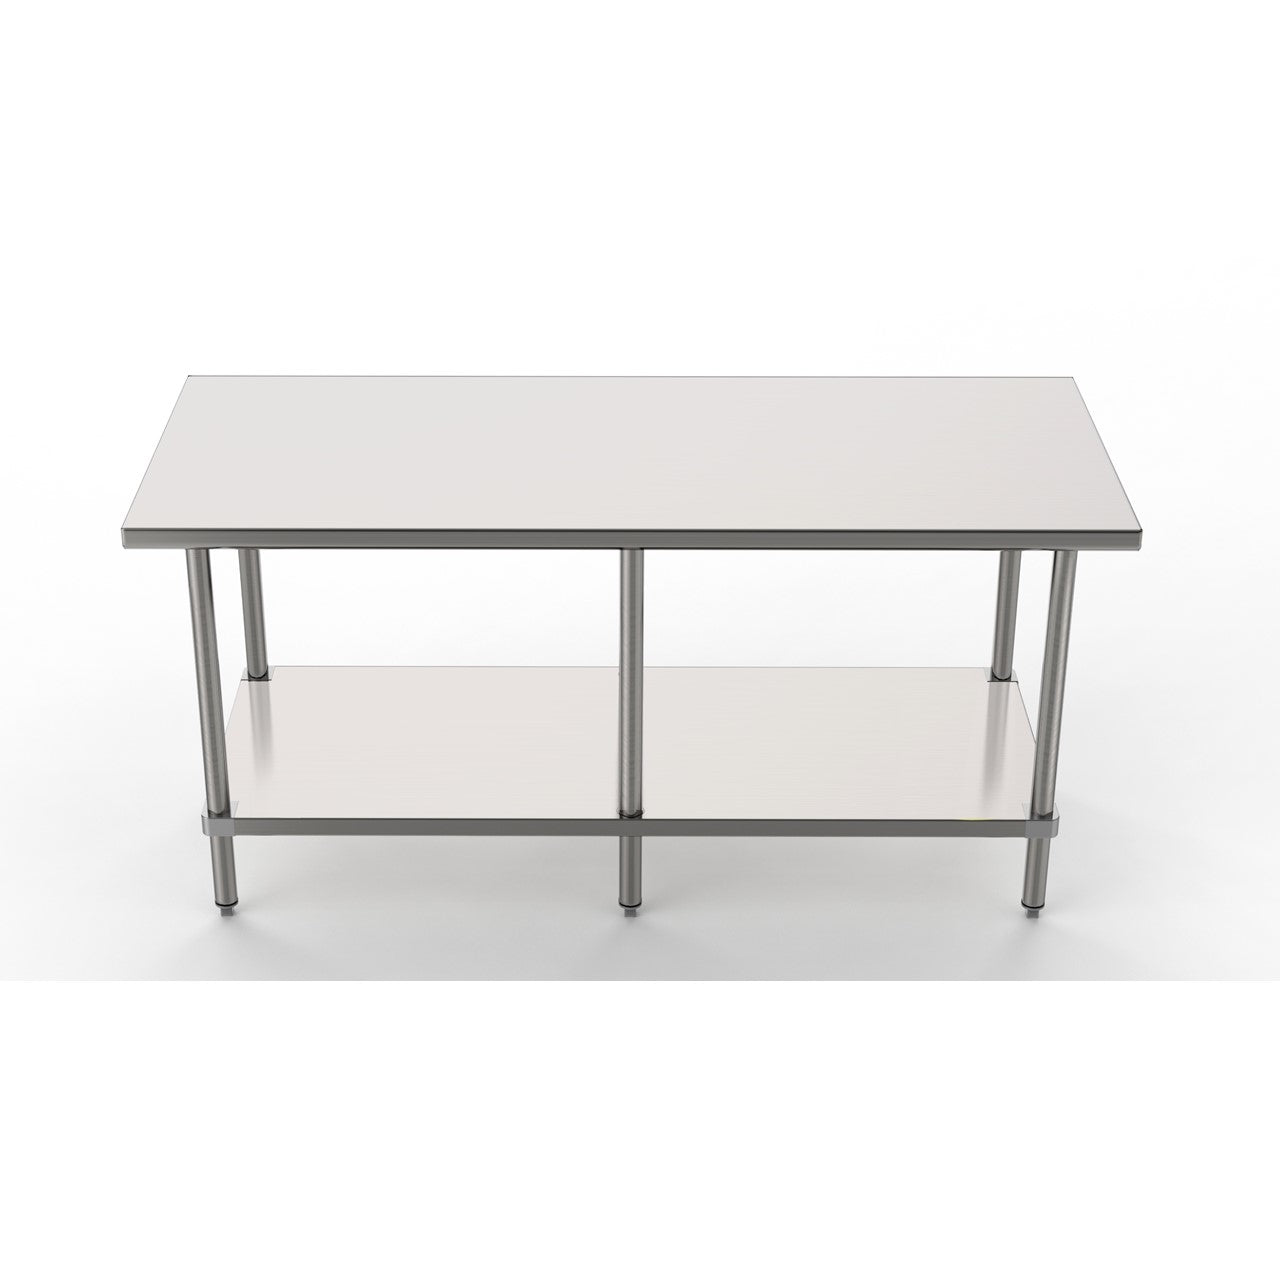 GSW Commercial Grade Flat Top Work Table with Stainless Steel Top, Galvanized Undershelf & Legs, Adjustable Bullet Feet, NSF/ETL Approved to Meet Sanitation Food Service Standard 37 (30"W x 84"L x 35"H)